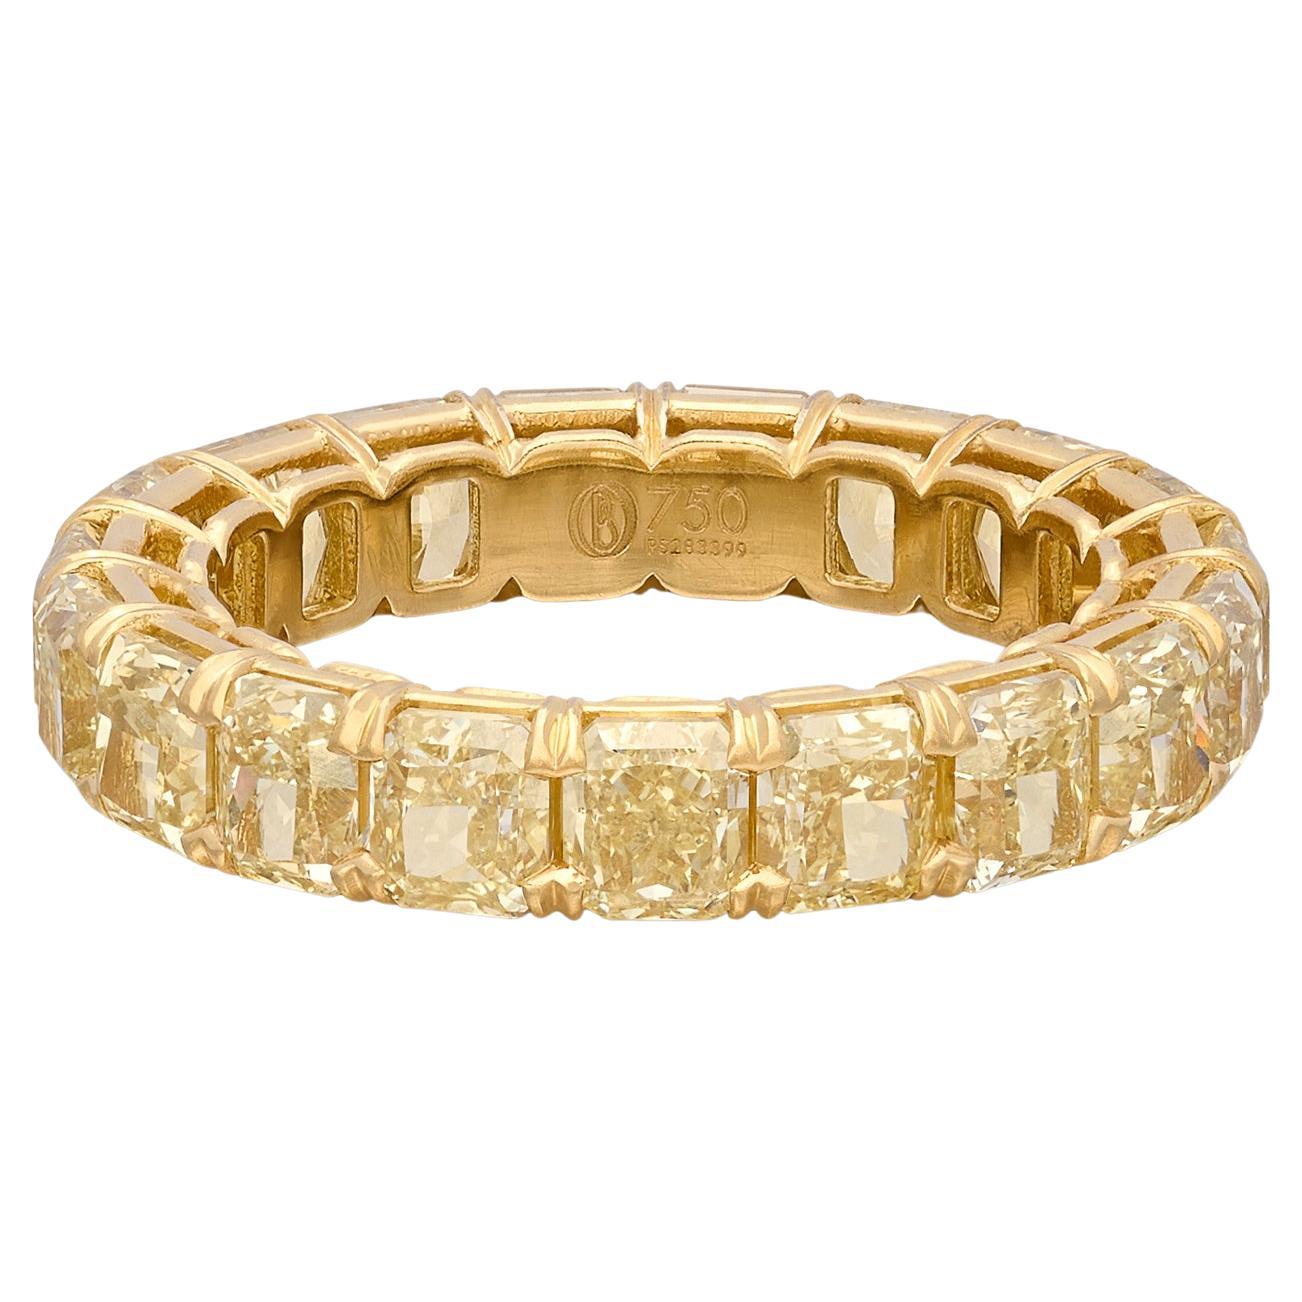 Exceptional 5.70ct Yellow Radiant Cut Diamond Eternity Band